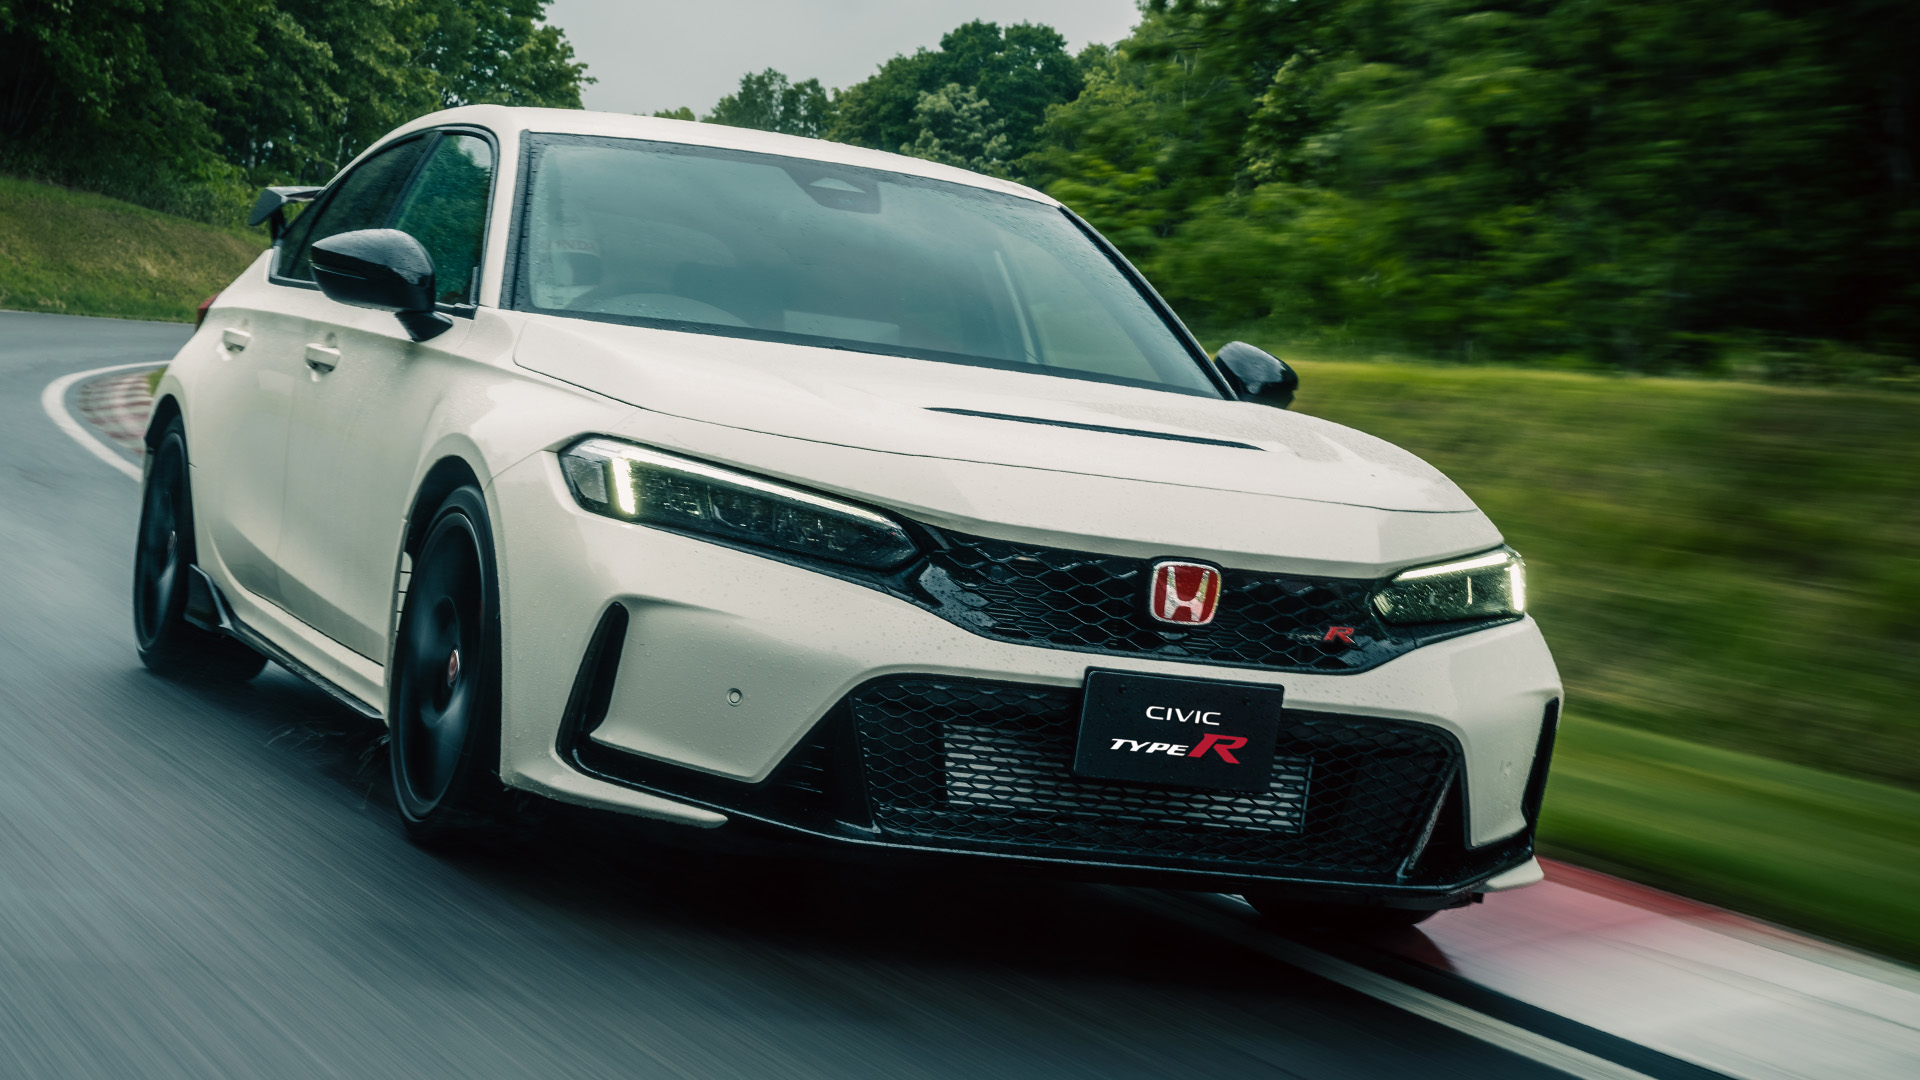 2023 Honda Civic Type R Good For 326 HP But Gains 88 Lbs | Carscoops